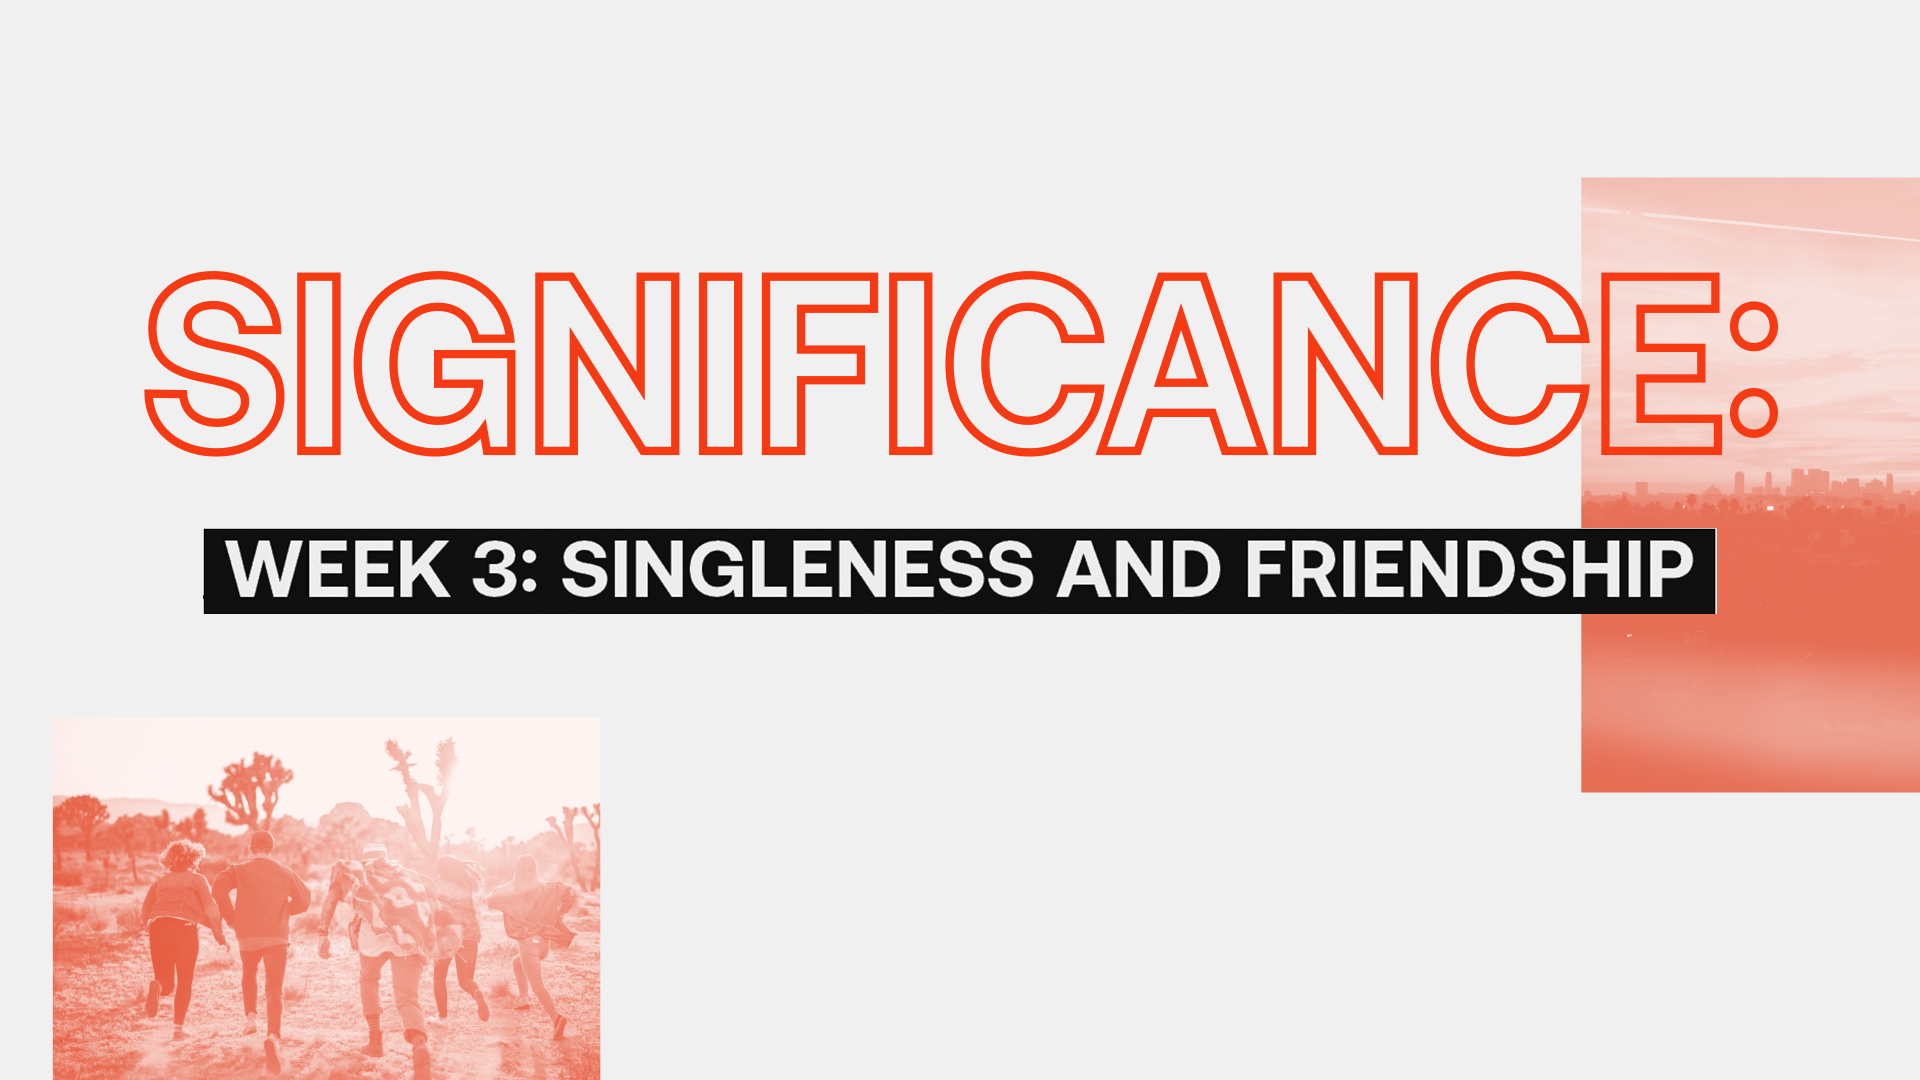 Significance: Singleness and Friendship 